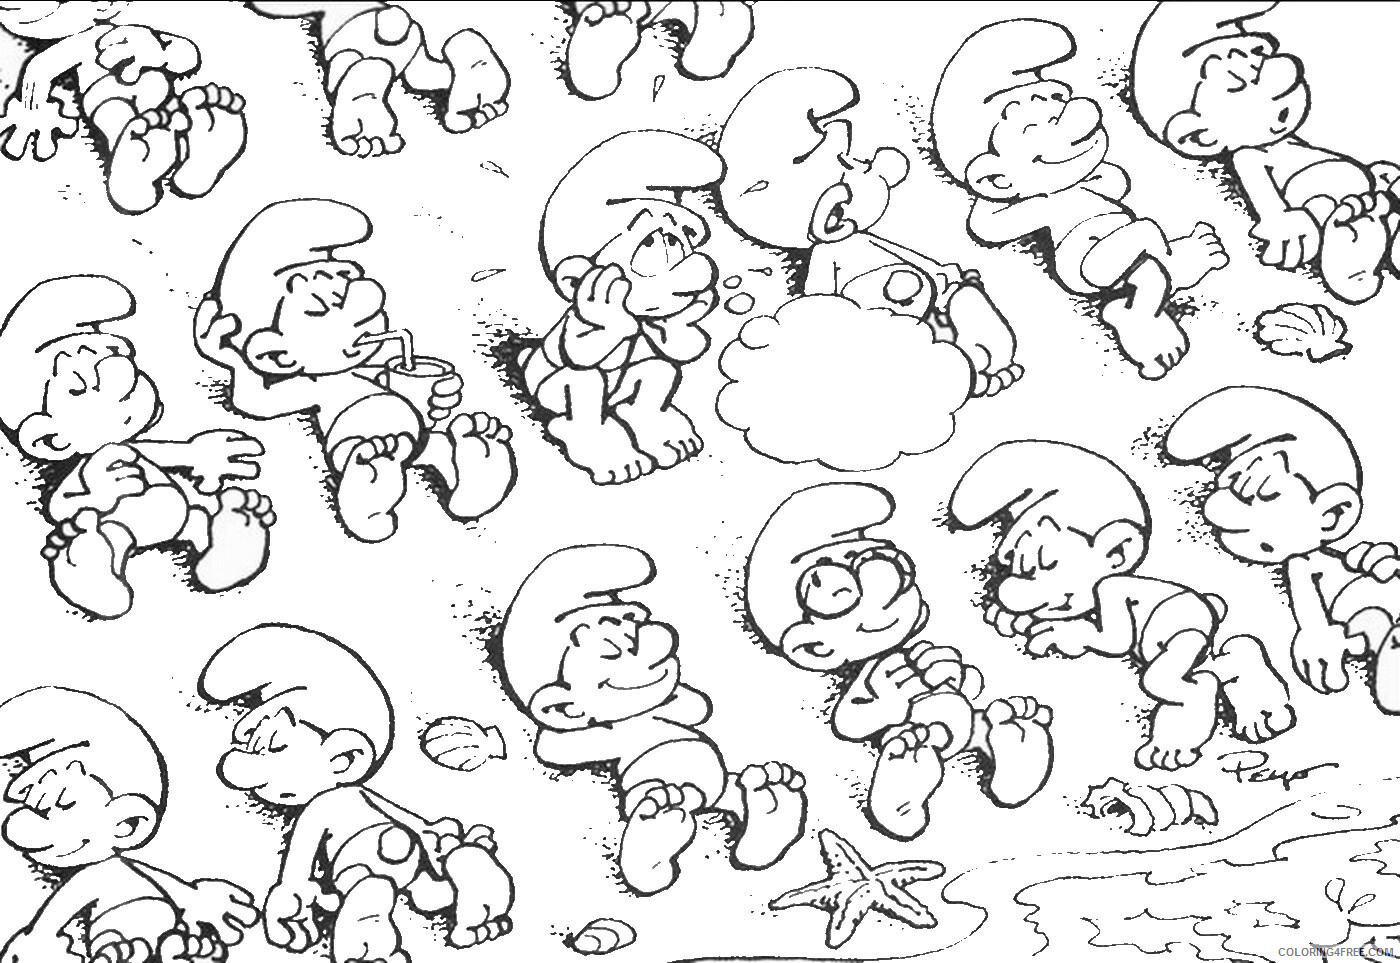 The Smurfs Coloring Pages TV Film smurfs_19 Printable 2020 09720 Coloring4free